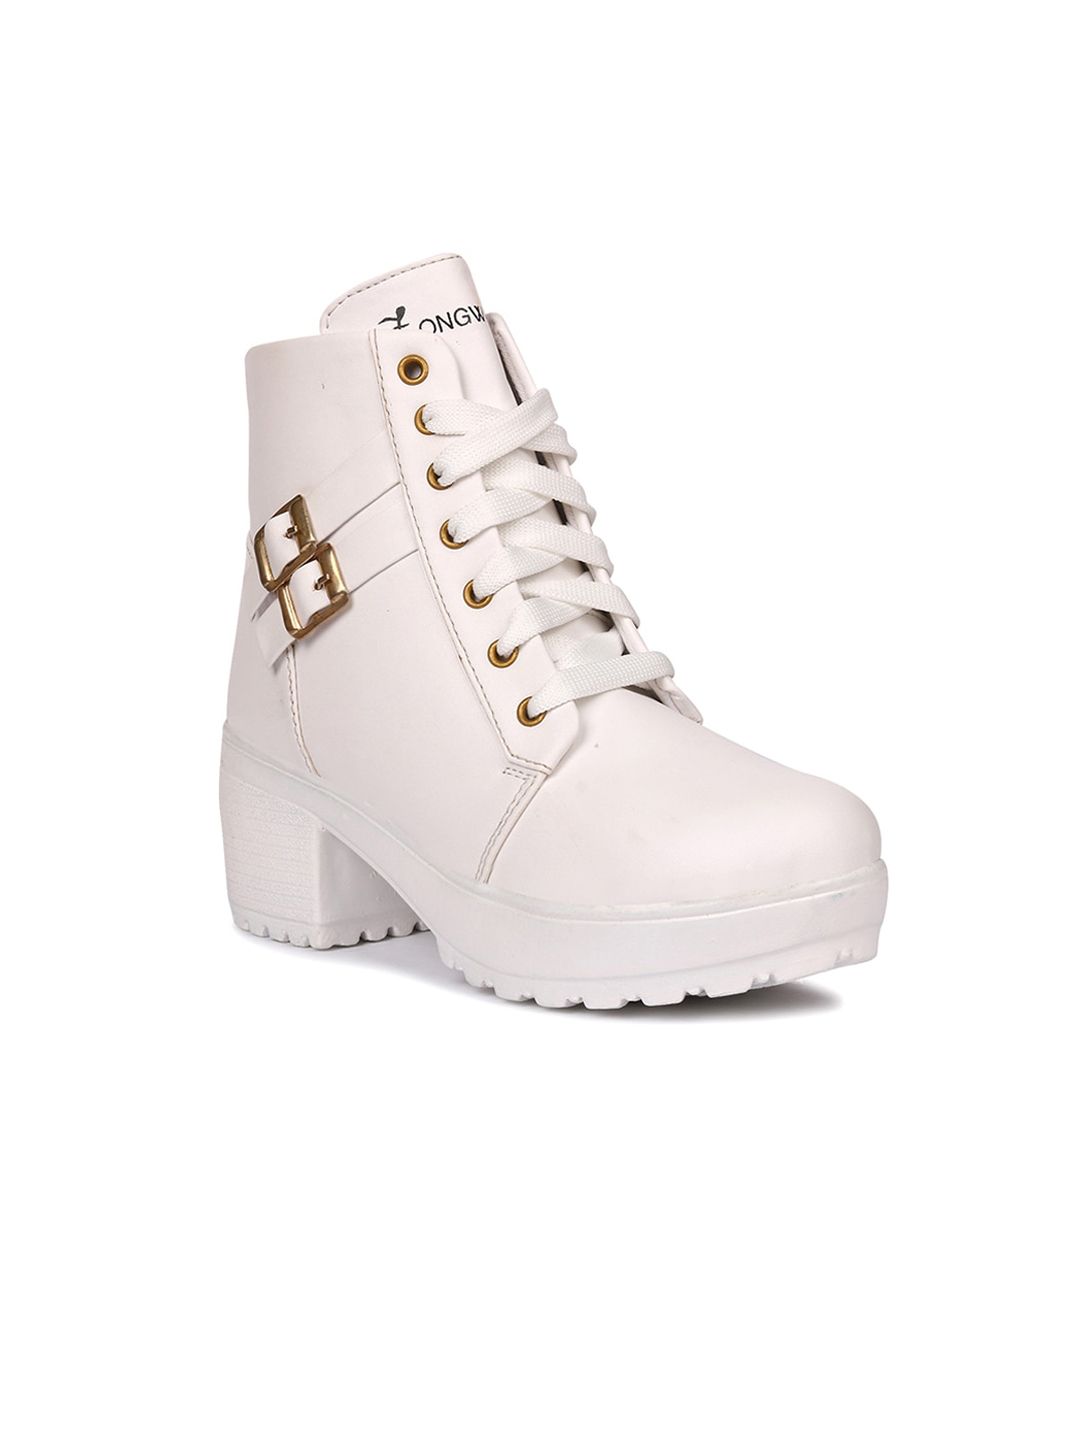 Longwalk White PU Platform Heeled Boots with Buckles Price in India